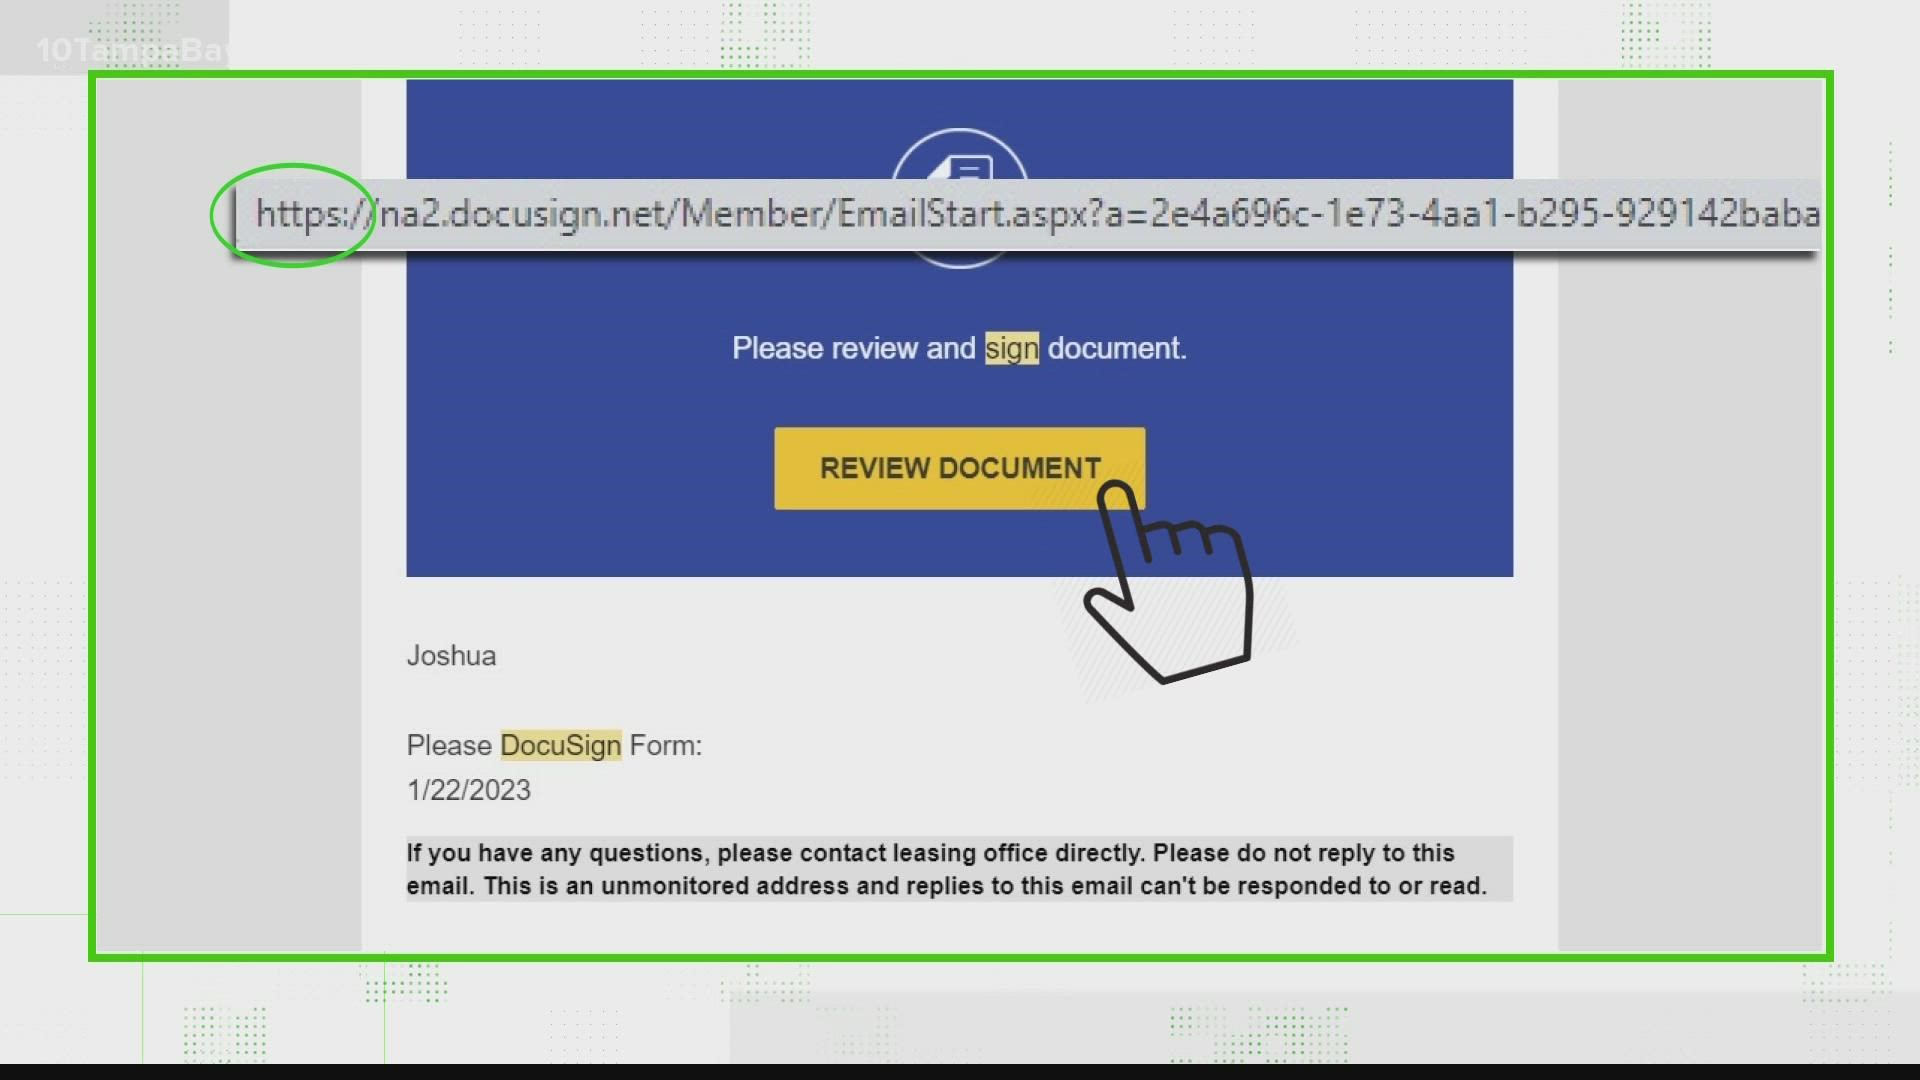 Scammers have spoofed and abused e-signature services like DocuSign to spam email inboxes with links to malicious websites.